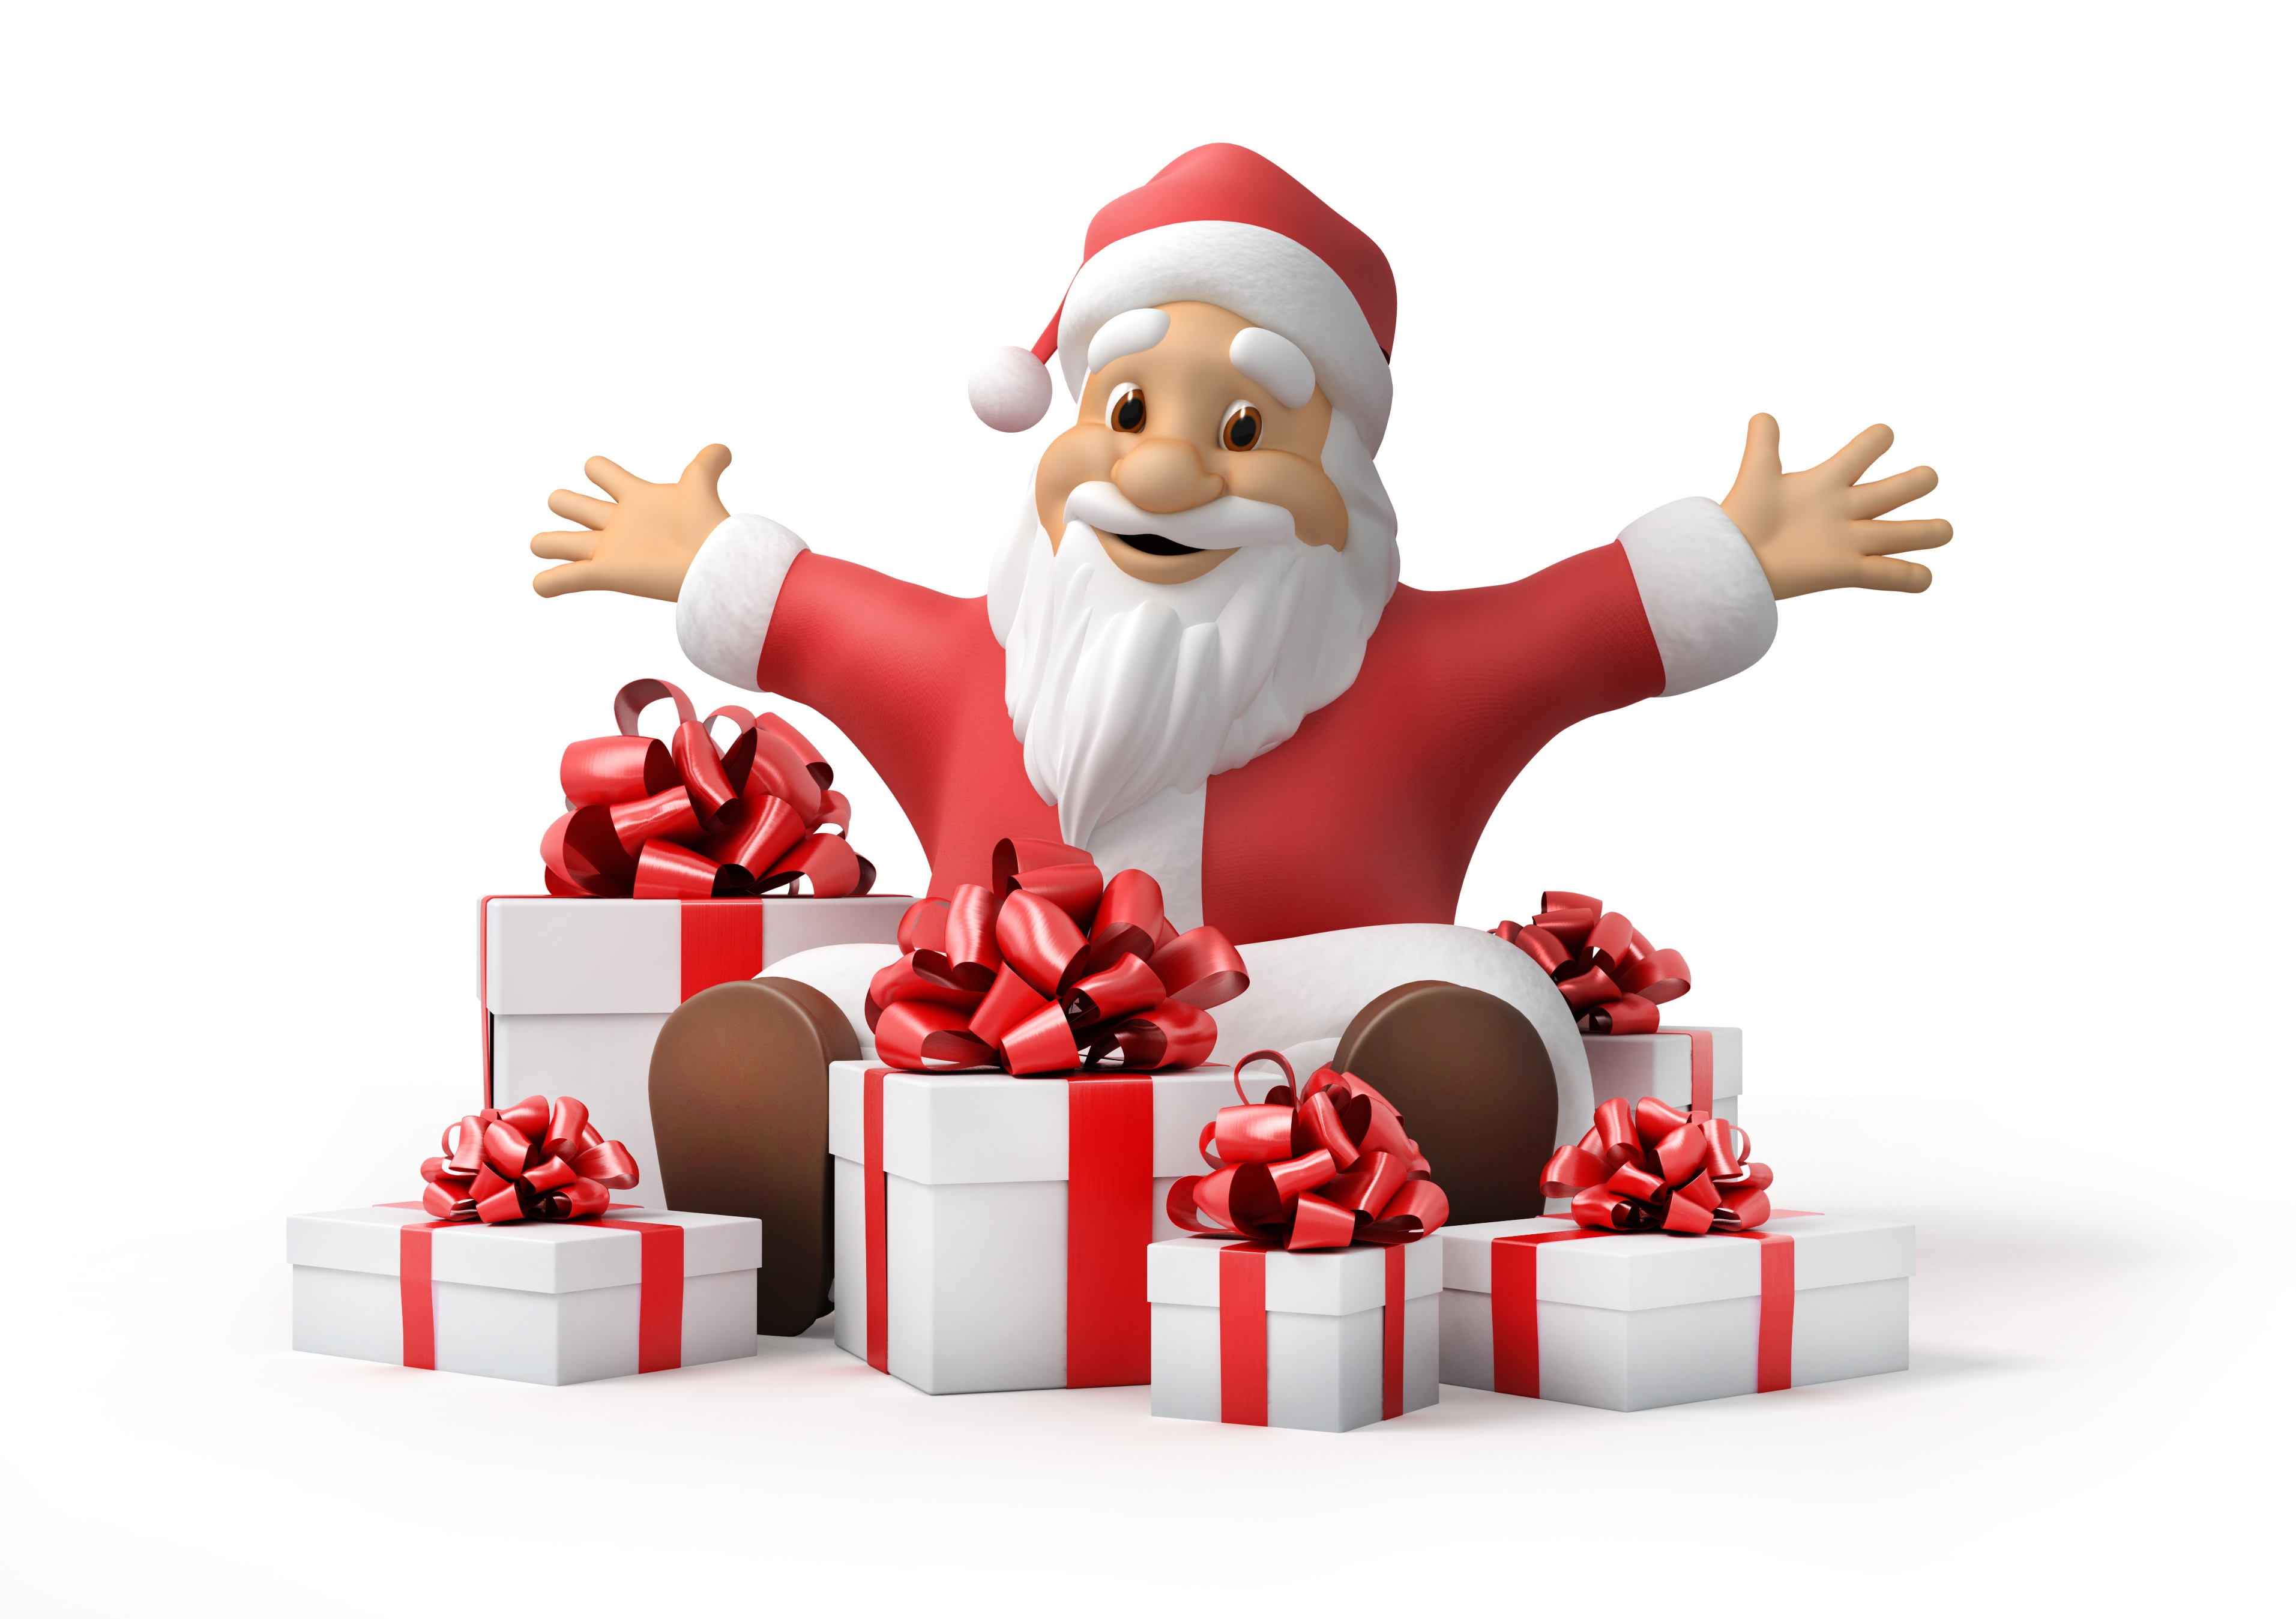 StockSubmitter|Illustrations/Clip-Art|Holidays|3D$|10|00000000000000000000000400000004000004|8$26@5001003.213_5010010.537@166$155$@Art-Illustration.3D$Holidays.Miscellaneous$@$@21$20$@$@$@$@349$26@$@$@$@$@$@$@$@$@43$68@$@$@0x6x202.15$0x6x192.15$0x6x199.15@Art-Illustration.3D$Holidays.Miscellaneous$@100$97$@8$26@$@$@$@$@$@$@520.0$158.0$@$@$@$@$@$@$||santa$Santa Claus^Fictional Character$claus$Santa Claus^Fictional Character$Xmas$Christmas^National Holiday$santa-claus$santa-claus^$christmas$Christmas^National Holiday$merry$Humor^$show$Showing^Moving Activity__$celebration$Celebration^$hat$Hat^Headwear$hand$Human Hand^The Human Body_$saint$Saint^Human Role$look$Looking^Using Senses$looking$Looking^Using Senses$happy$Happiness^_$new year$New Year^Holiday_New Year's Eve^Holiday_New Year's Day^Holiday_$3d$Three-dimensional Shape^Geometric Shape_$abstract$Abstract^Composition$paper$Paper^Material__$list$List^Document$white$White^Descriptive Color_$blank$Blank^Physical Description_$hold$Holding^Touching$background$Backgrounds^$gift$Gift^Man Made Object$isolated$Isolated^Cut Out_$illustration$Illustration and Painting^Image$red$Red^Descriptive Color$season$Season^Setting$winter$Winter^Season$work-path$Work-path^$ad$Billboard^Commercial Sign_$finger$Human Finger^The Human Body__$beard$Beard^Facial Hair$sheet$Sheet^Bedding|$$0$0$0||00000000000000000000000000000000000000|